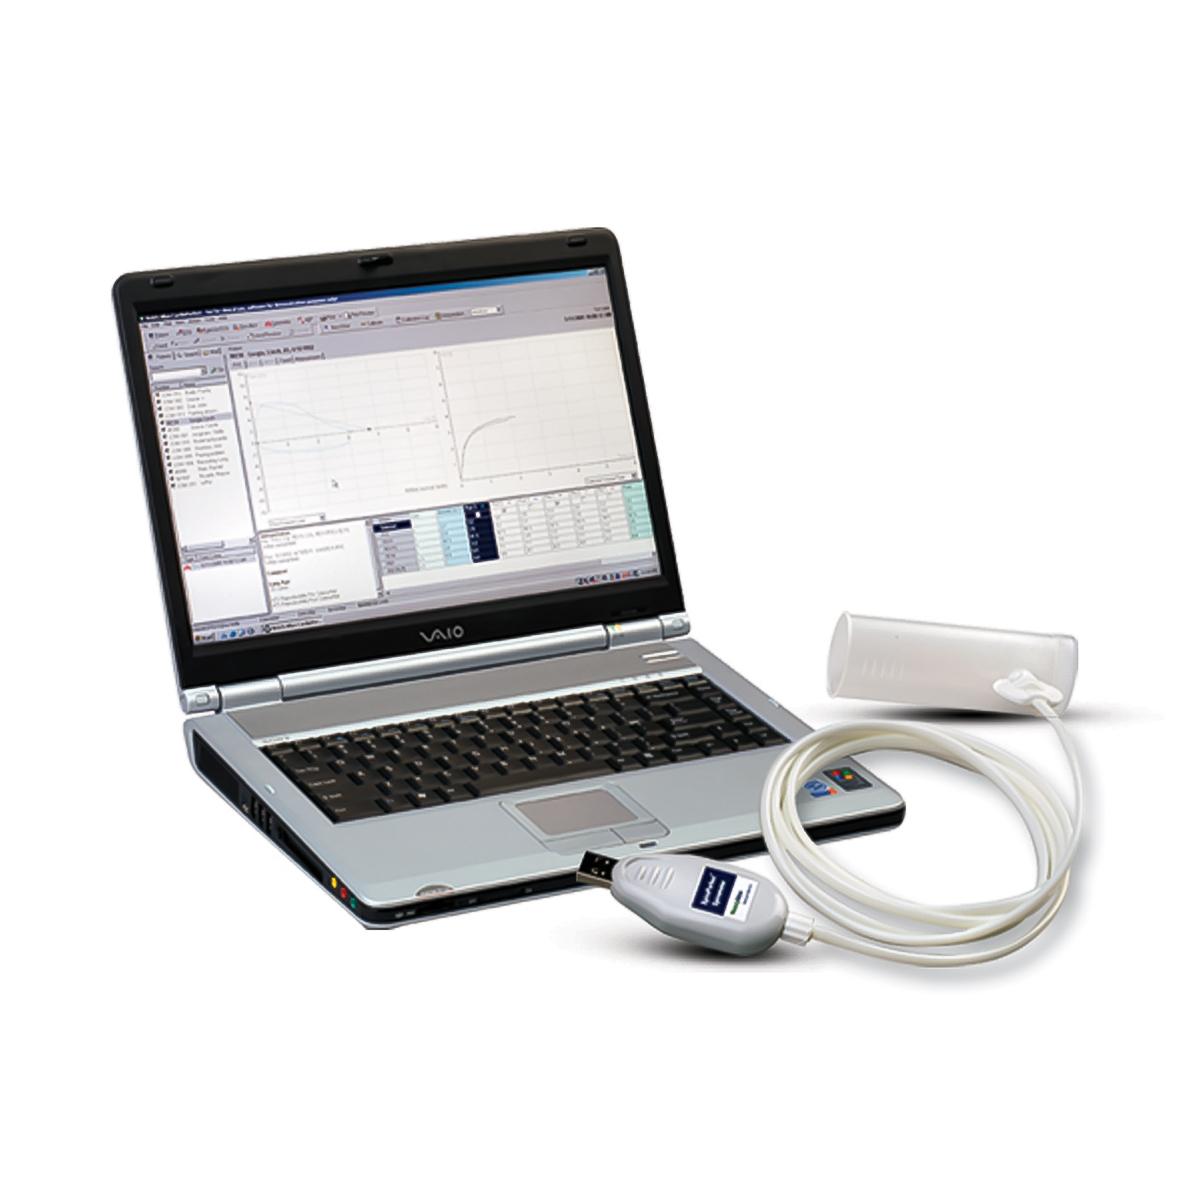 A Welch Allyn SpiroPerfect PC-Based Spirometer with a laptop computer.